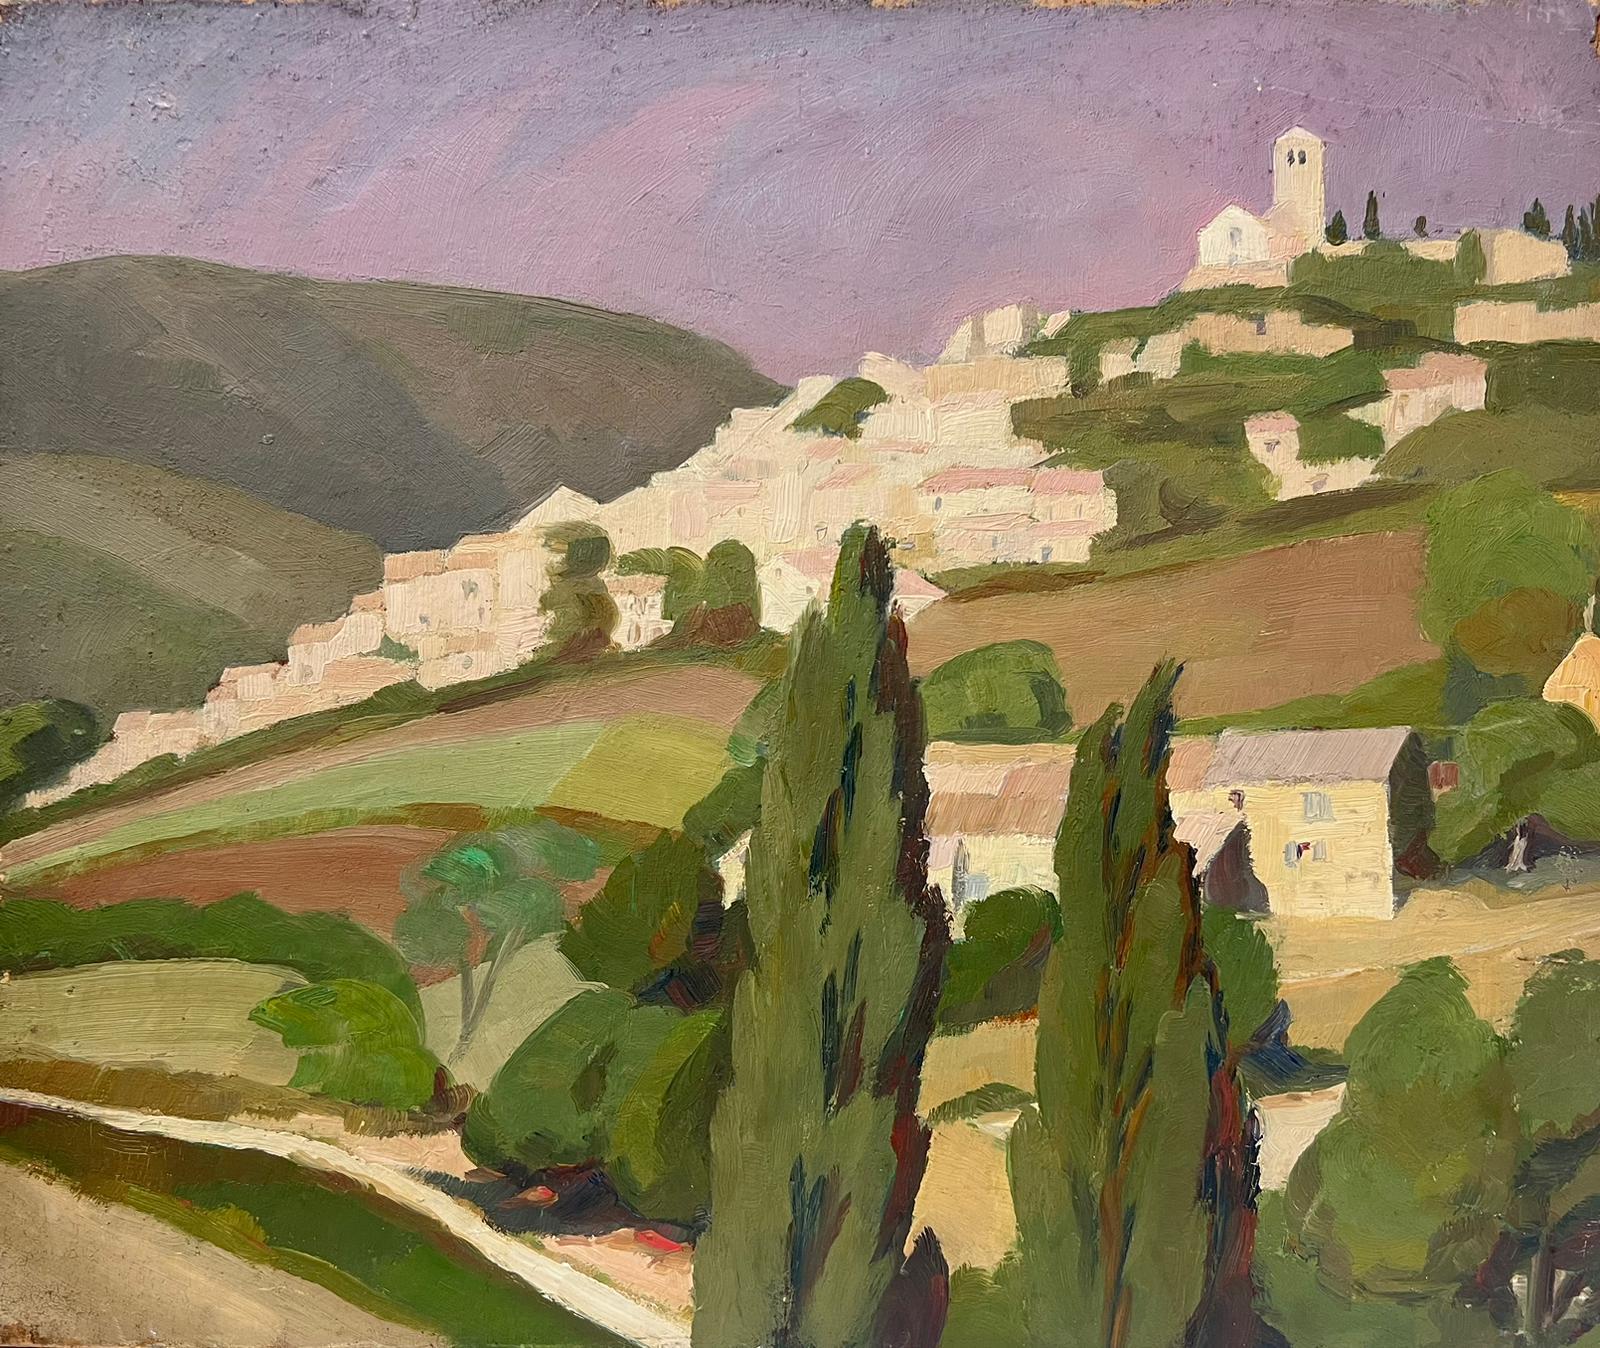 French Mid 20th Century Landscape Painting - Provencal Hilltop Village in Landscape Mid 20th Century French Oil Painting